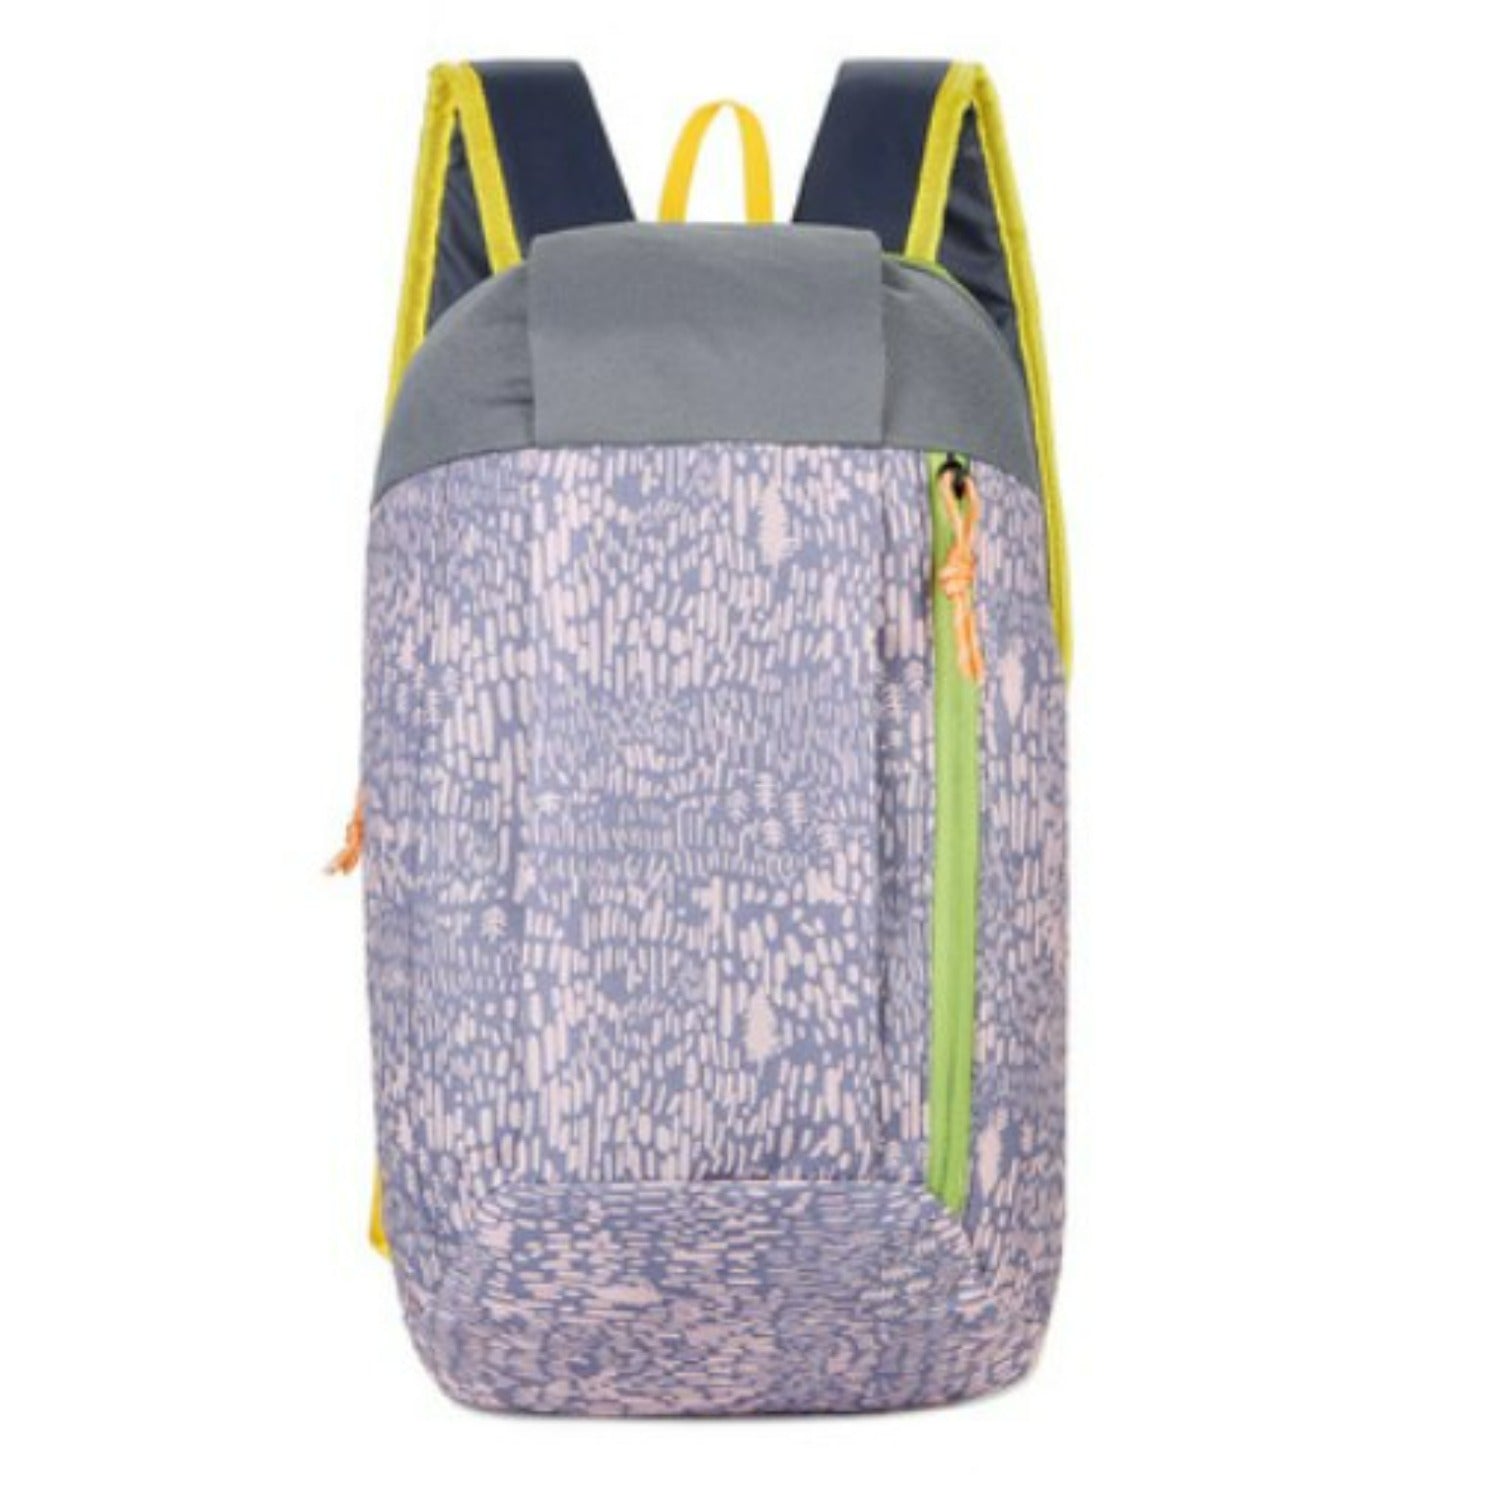 Backpack with Printed Design